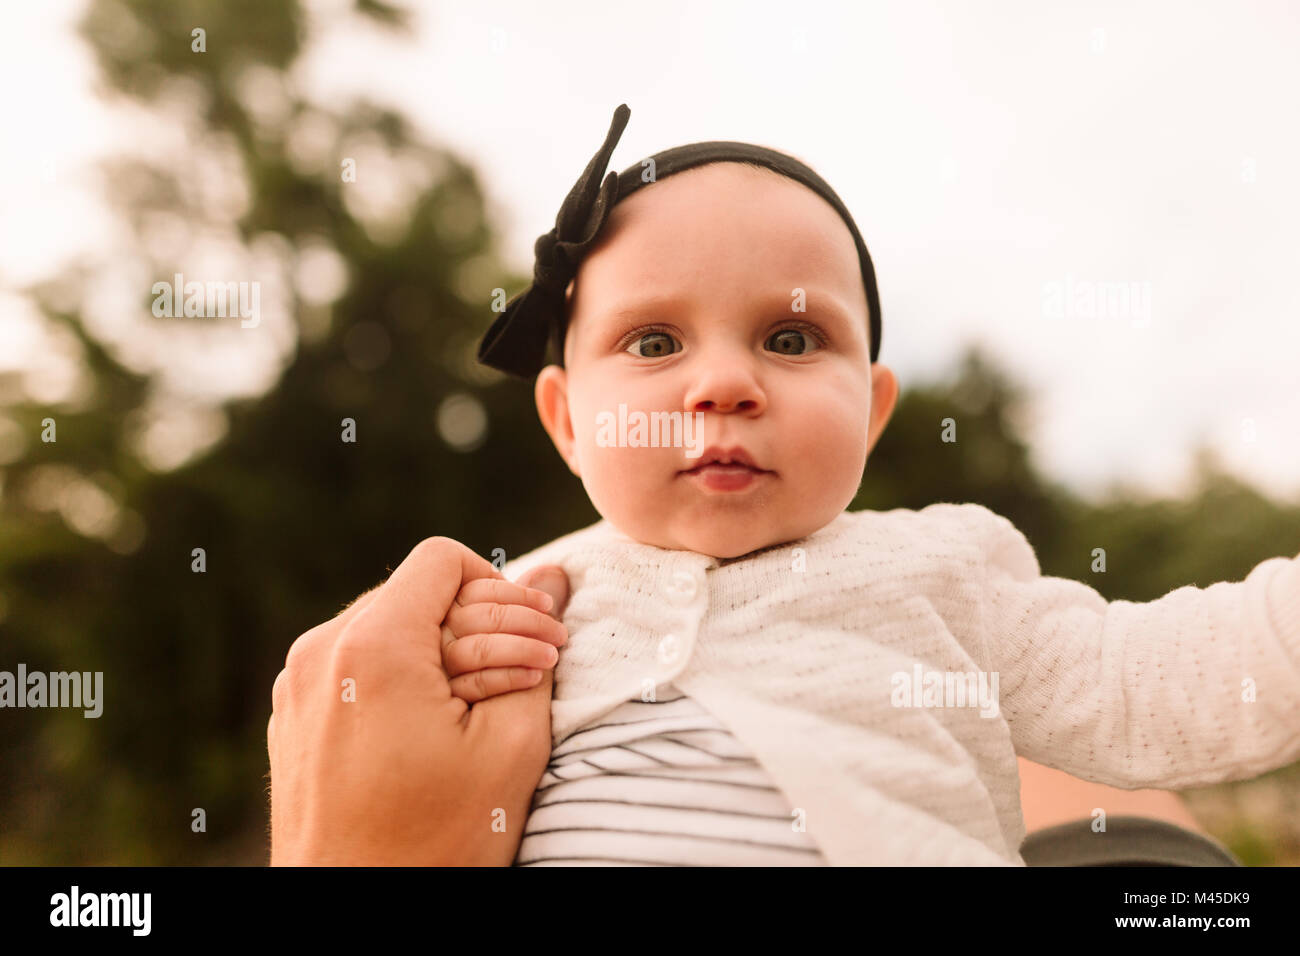 Portrait of baby girl holding mothers hand, close up Stock Photo